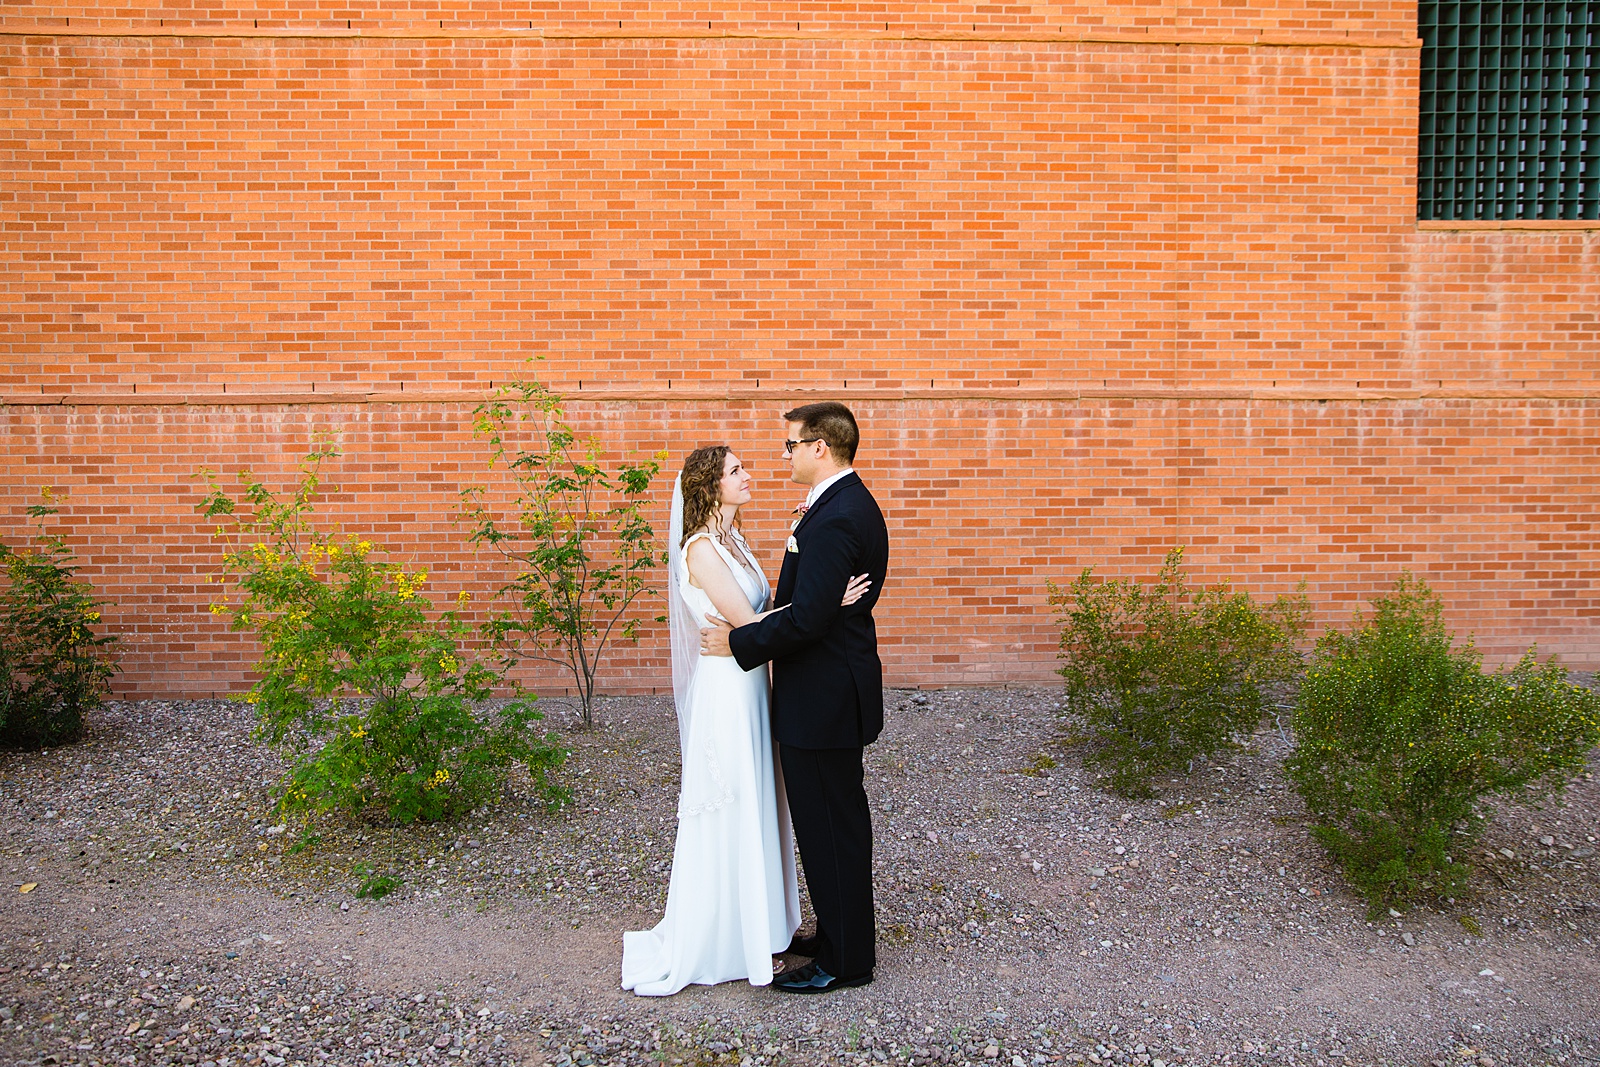 Bride and groom share an intimate moment during their first look at Arizona Historical Society by Phoenix wedding photographer PMA Photography.